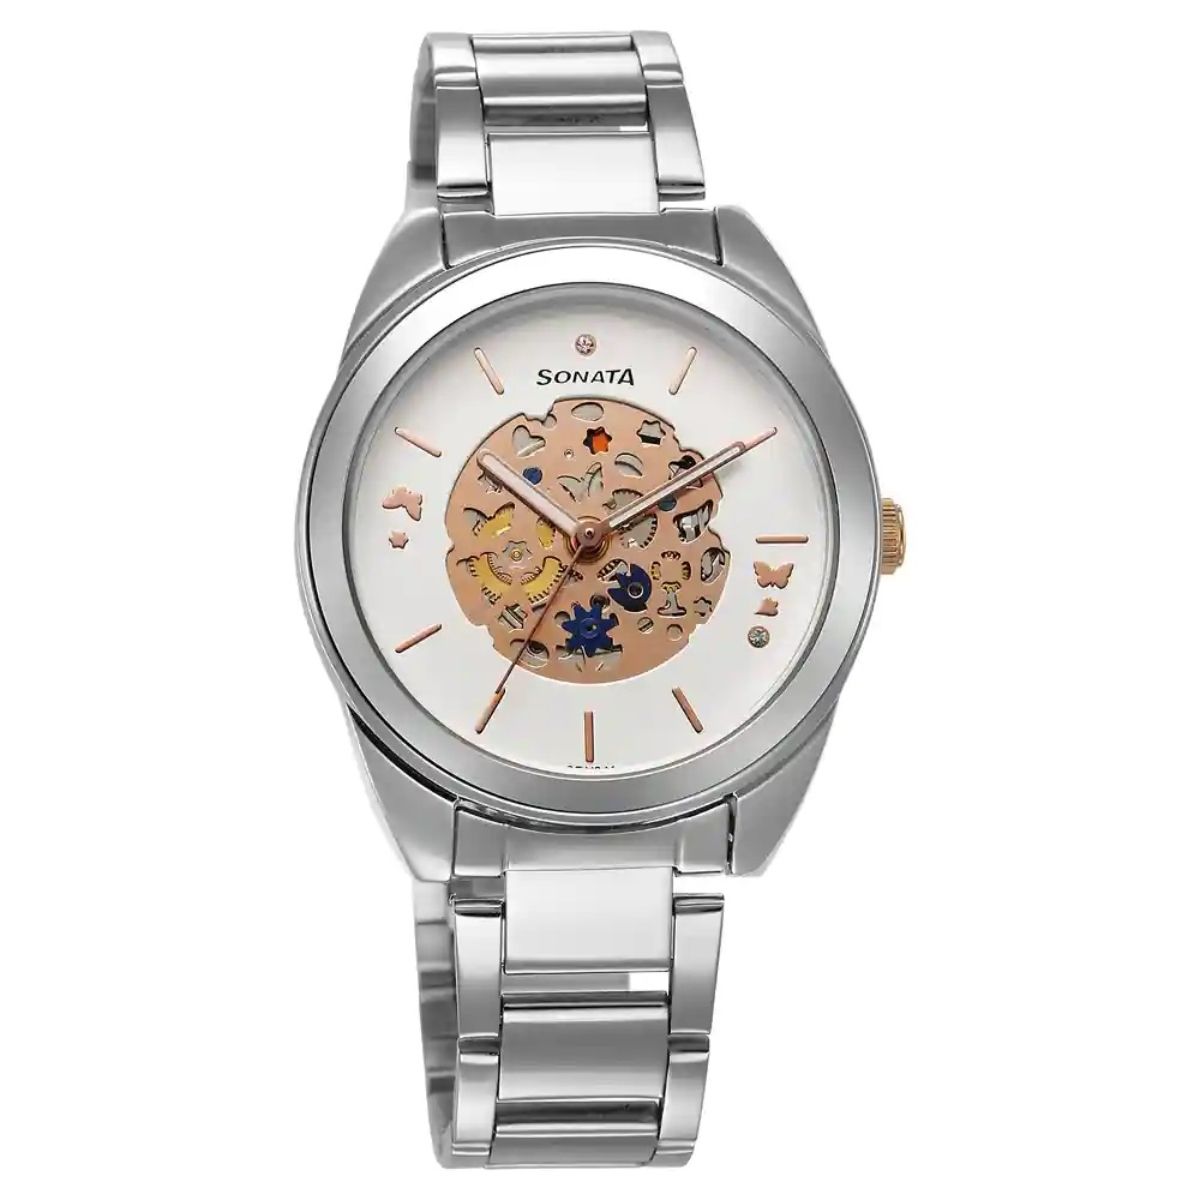 Buy Sonata Off White Dial Analog Watch for Men-7140WL02 at Amazon.in